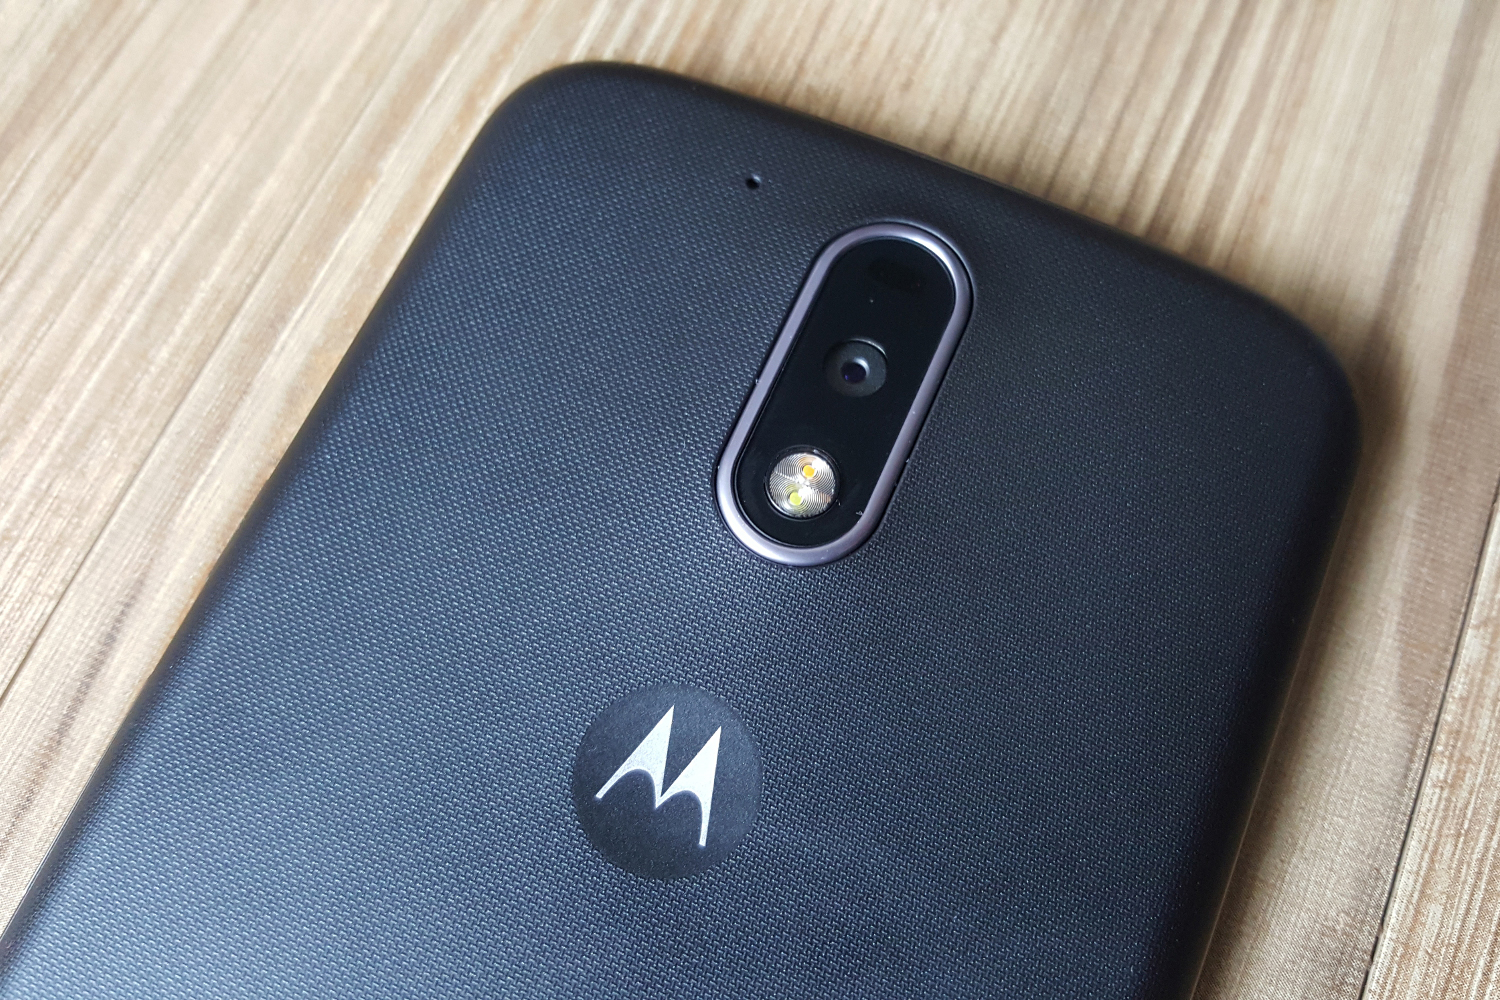 Moto G4 and G4 Plus review: Bigger and (mostly) better